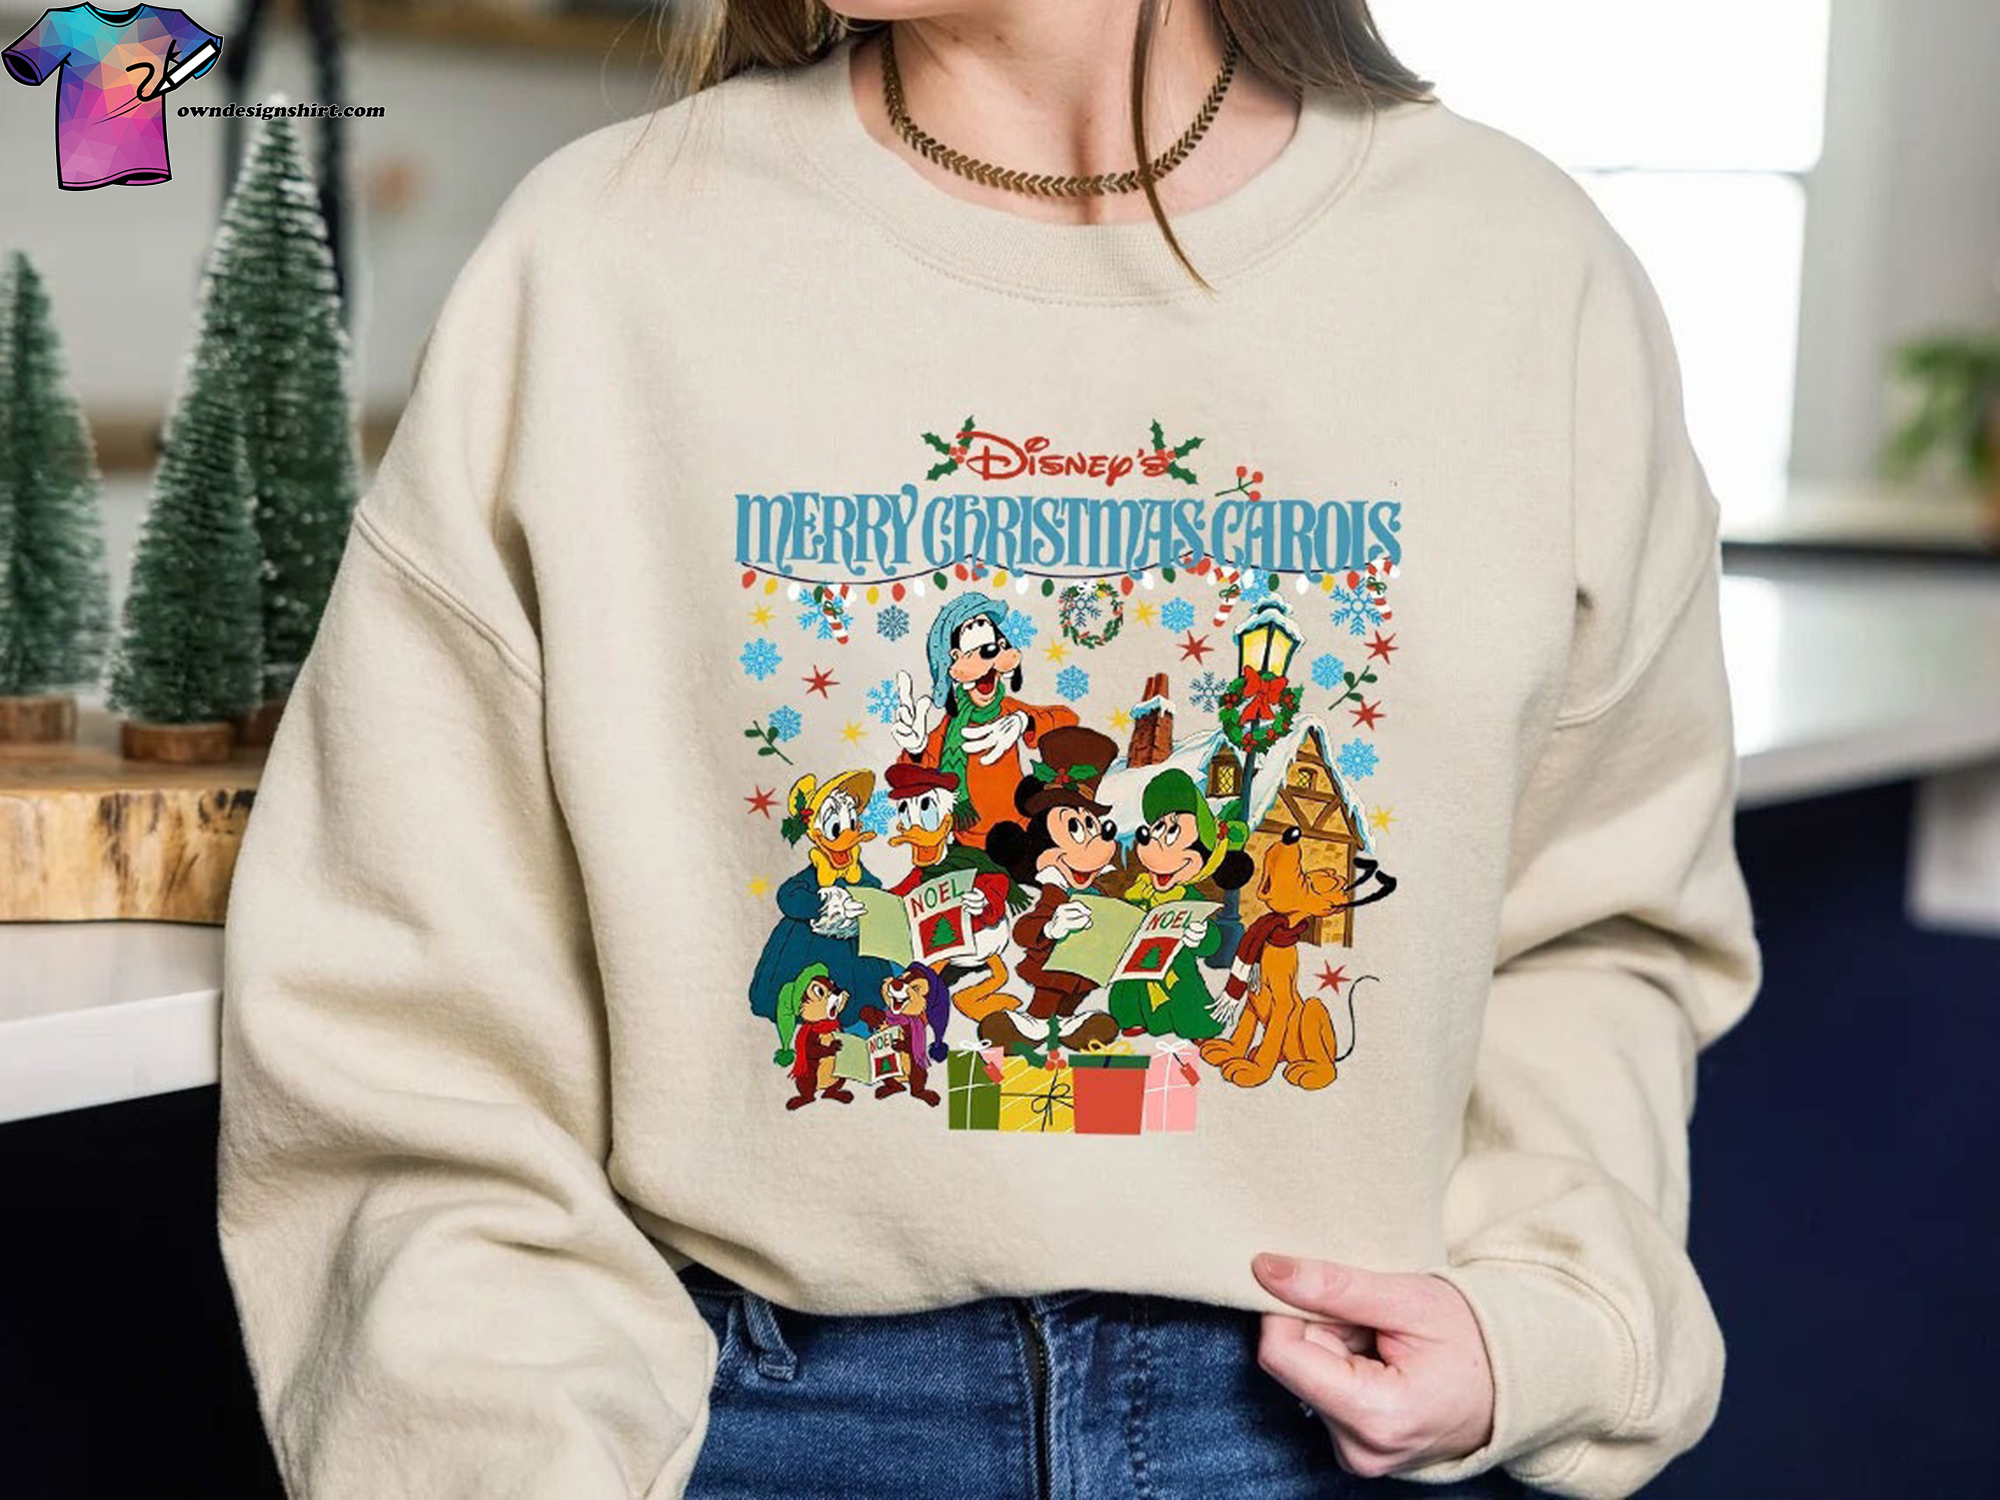 Spread Holiday Cheer with the Perfect Gift Mickey Mouse Christmas Sweater